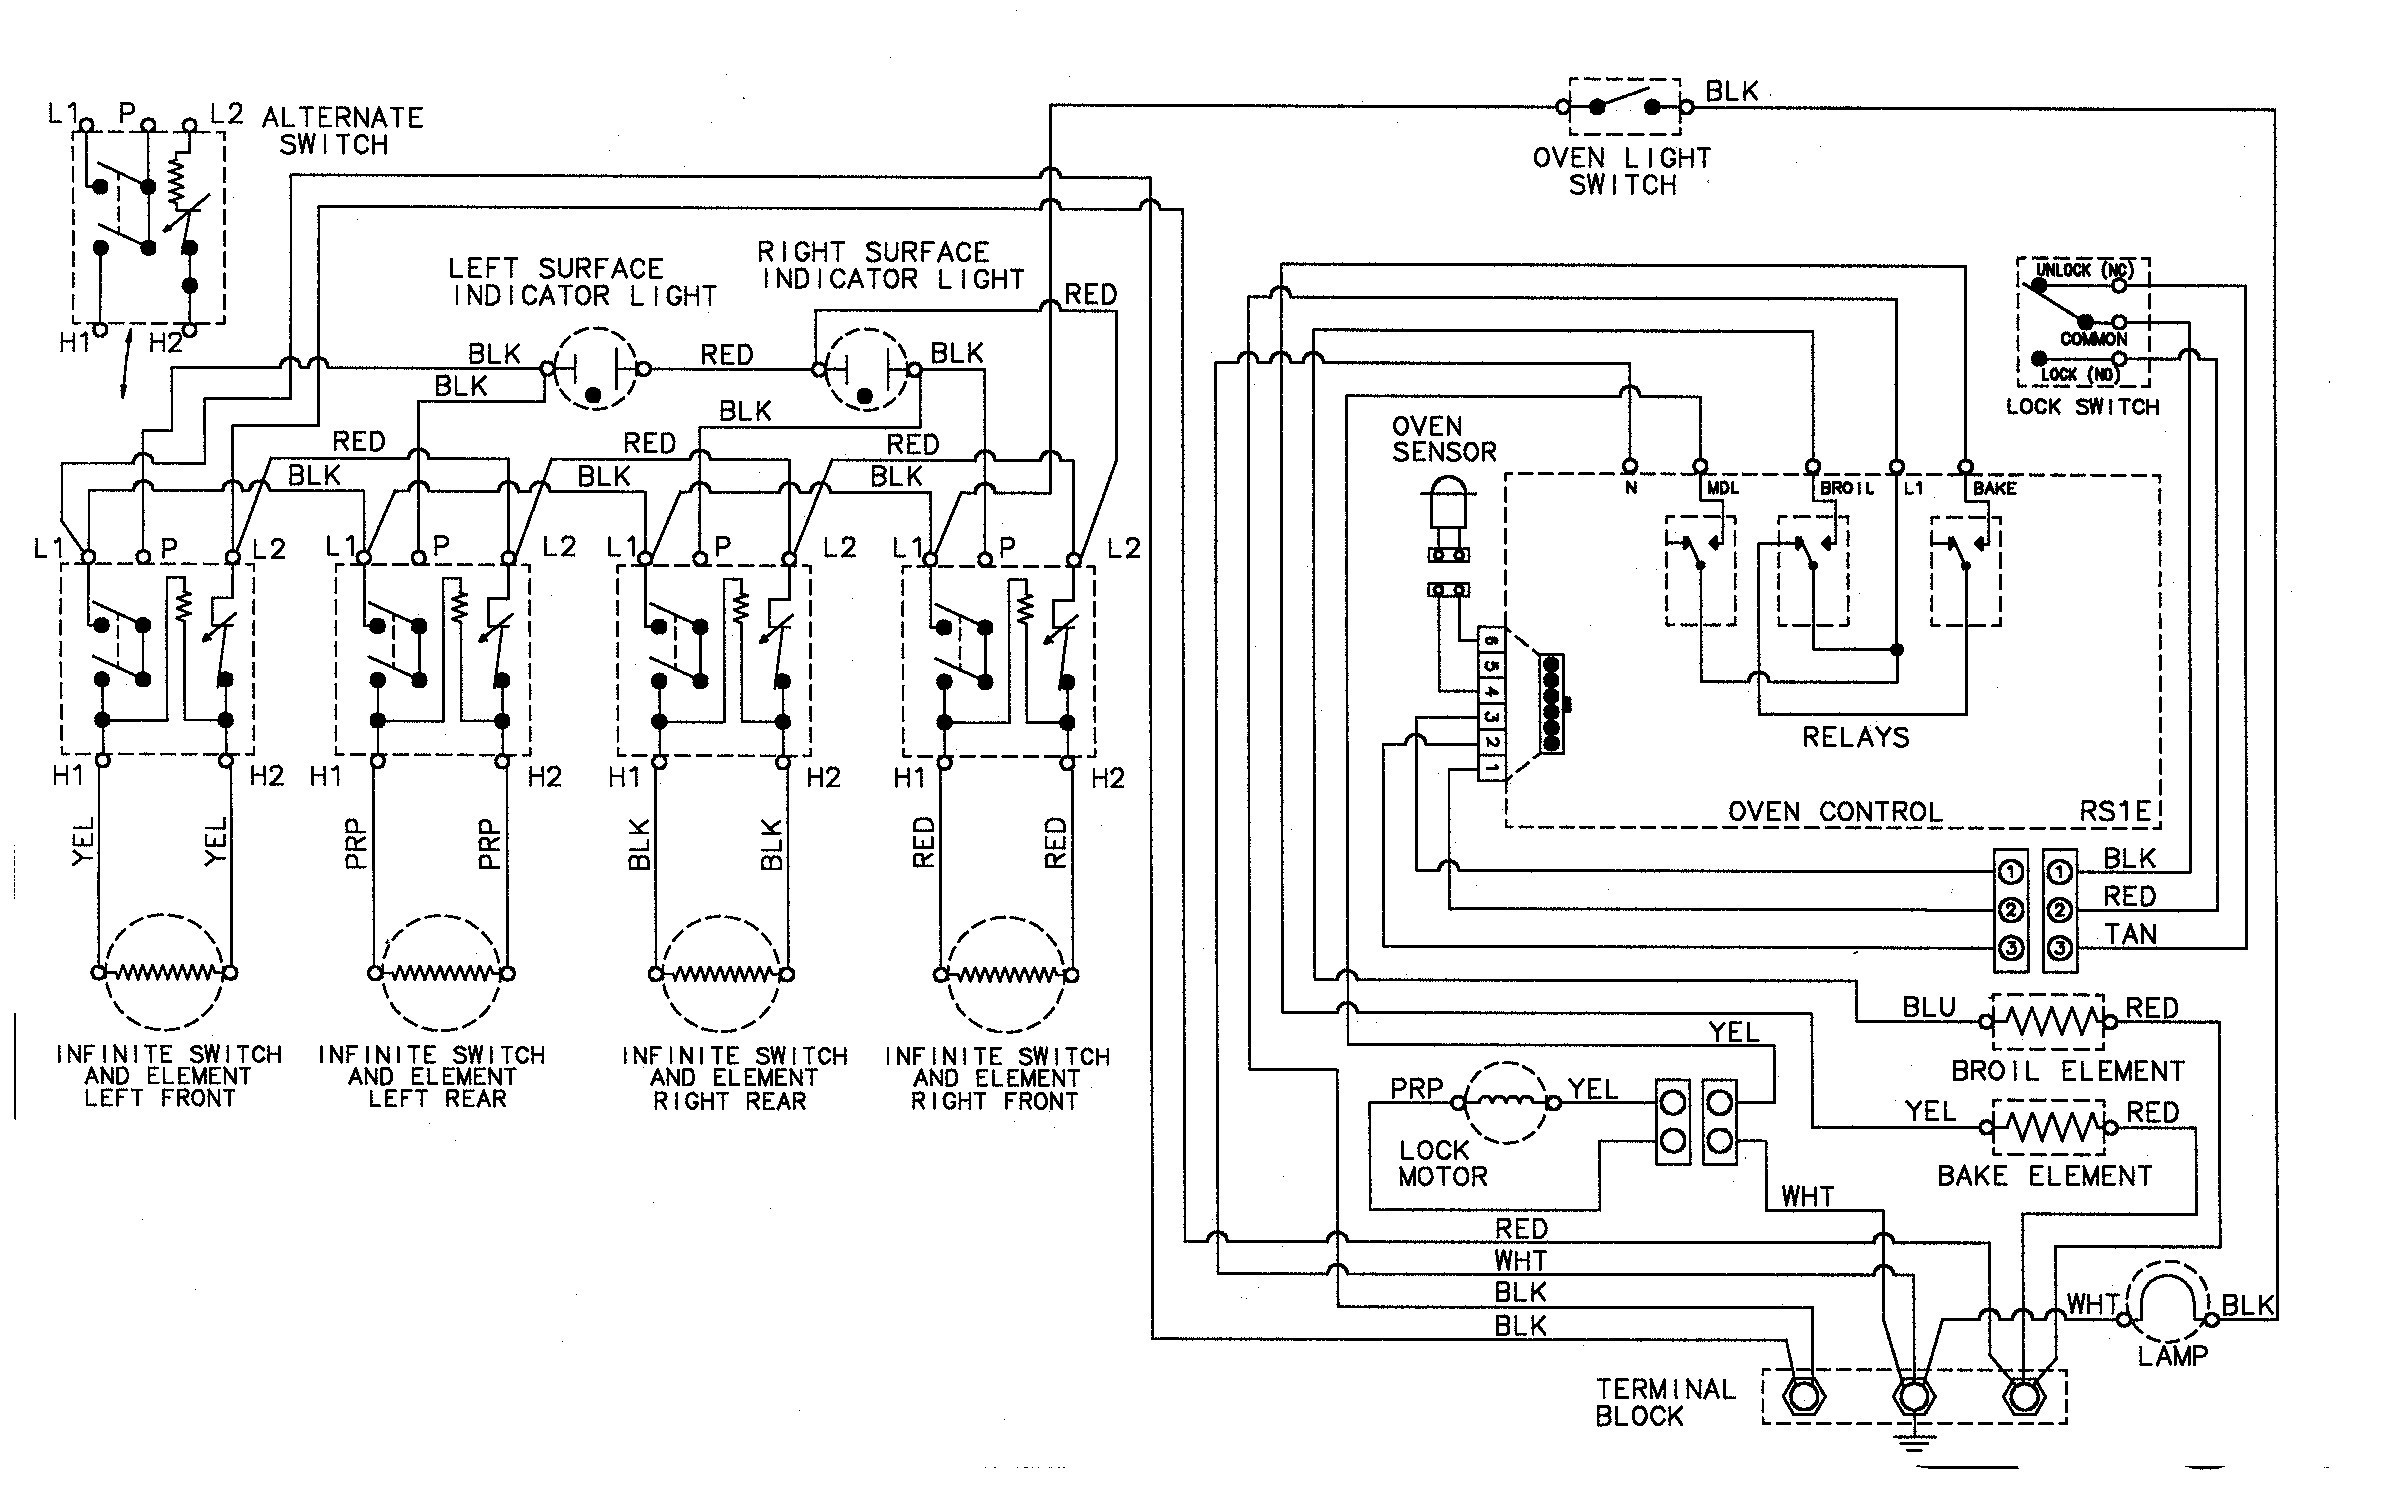 Wiring Diagram for Electric Stove Fresh Electric Stove Wiring Diagram Unique Amazing Electric Oven Circuit